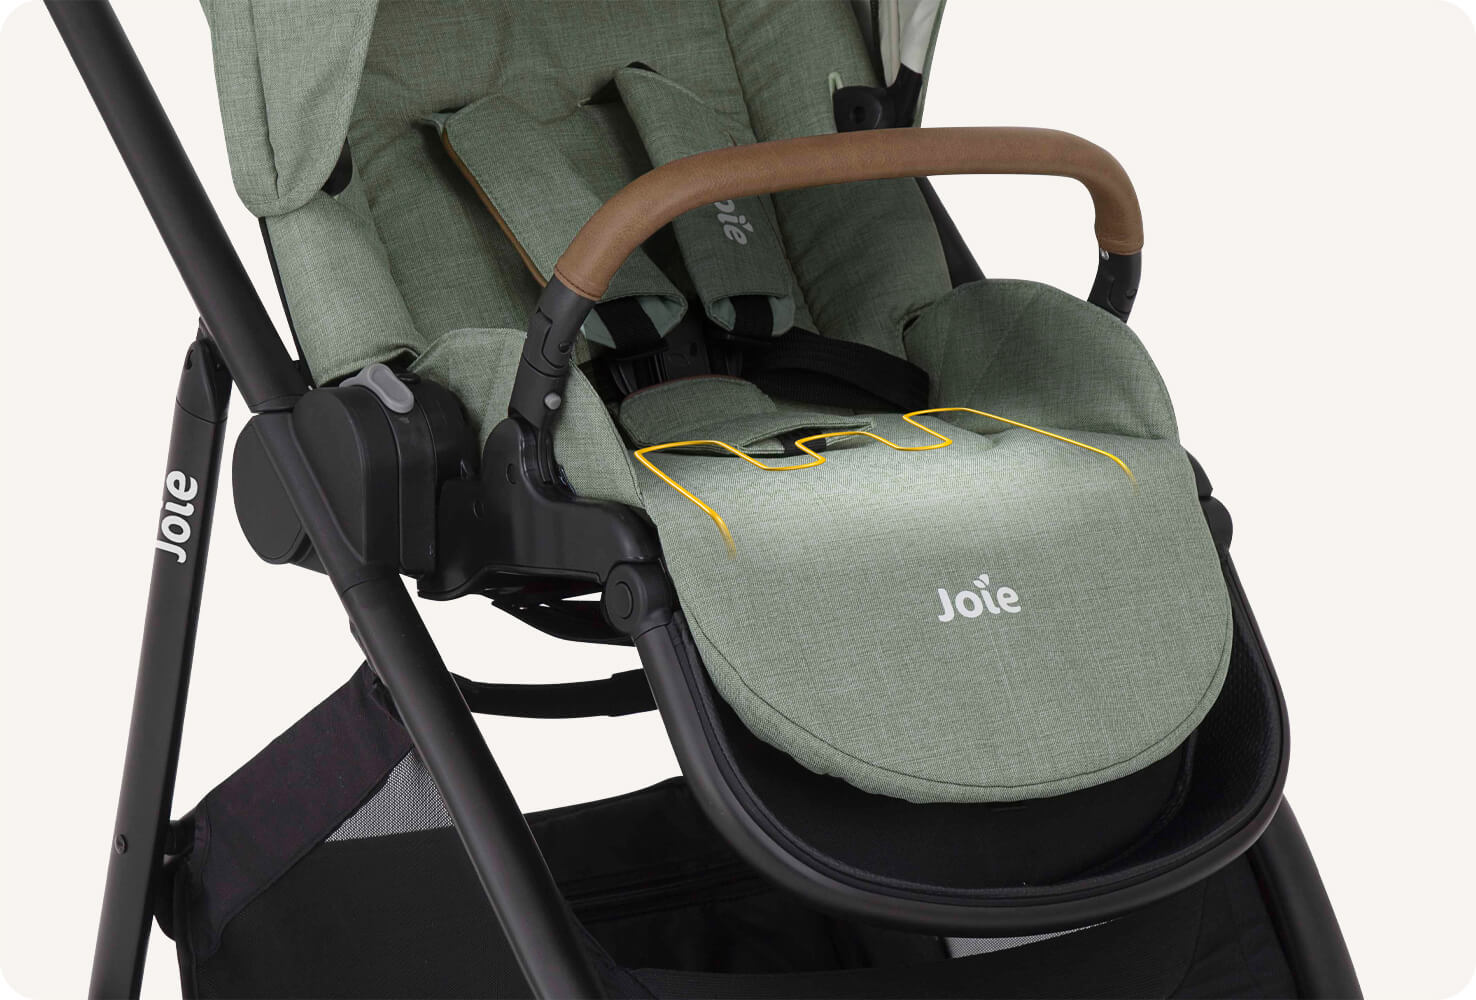 Zoomed in view of the seat on a Joie versatrax pram.